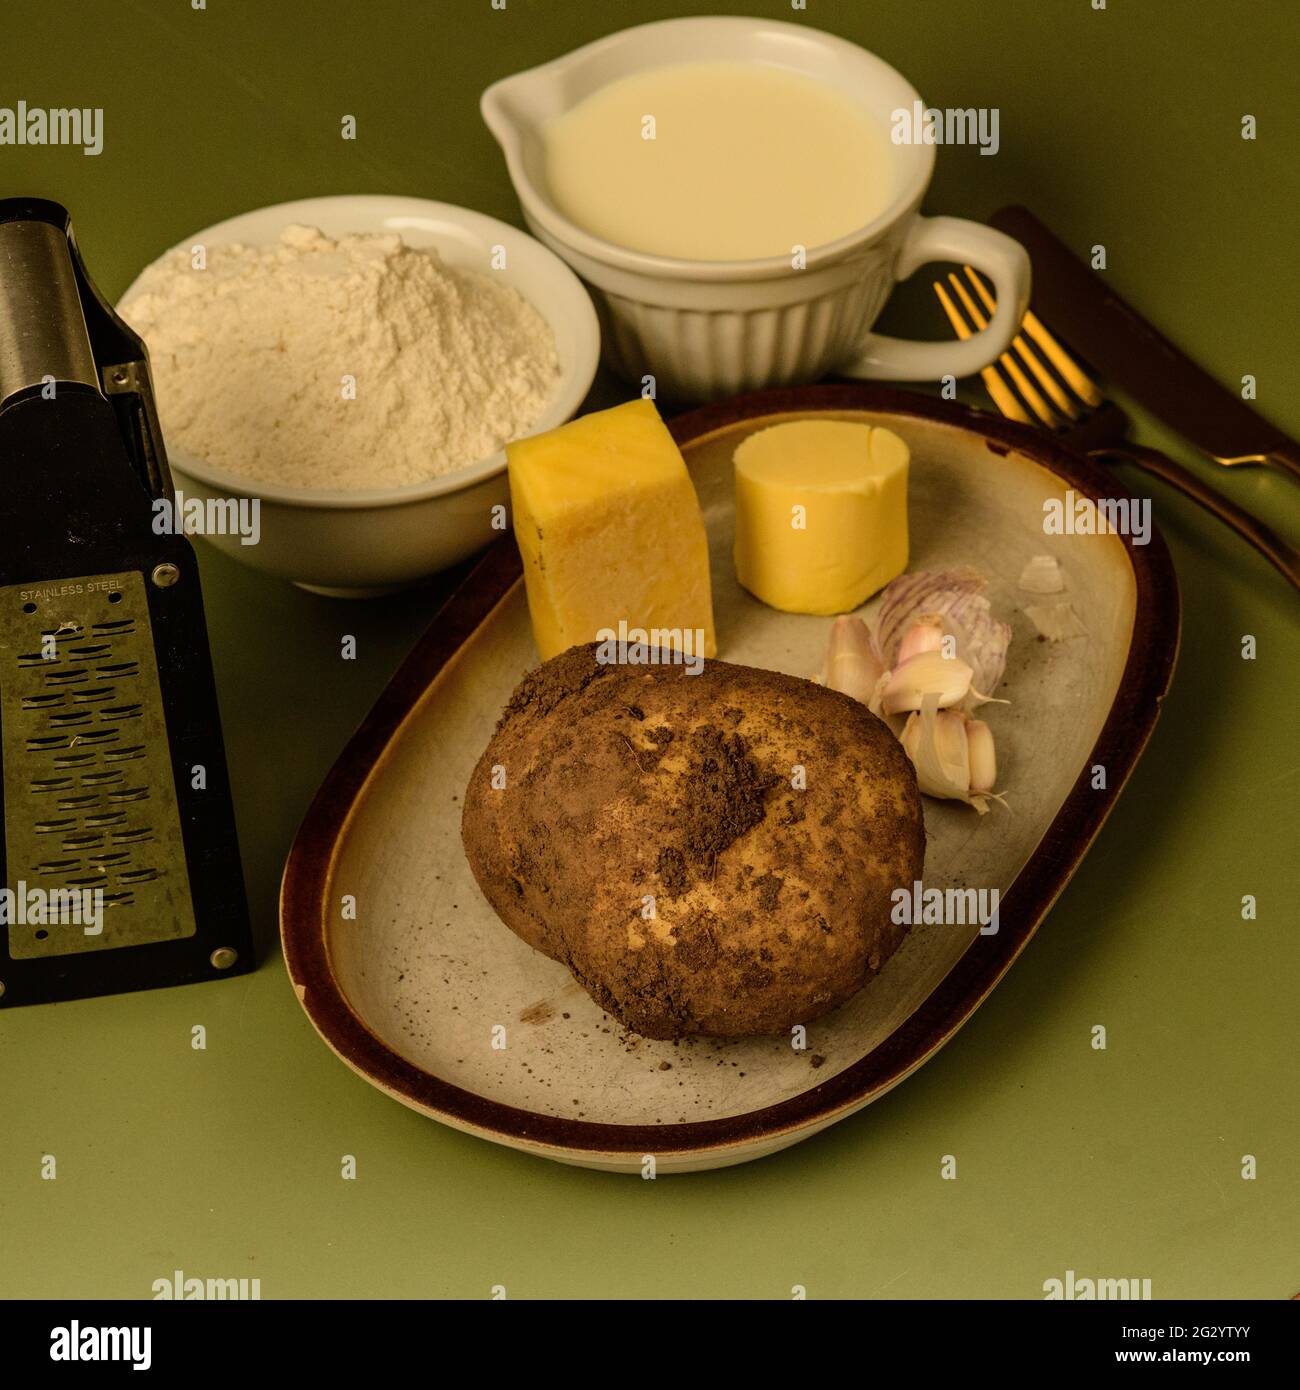 Creating new dimensions in Nouvelle Cuisine, Deconstructed Scalloped Potato Stock Photo